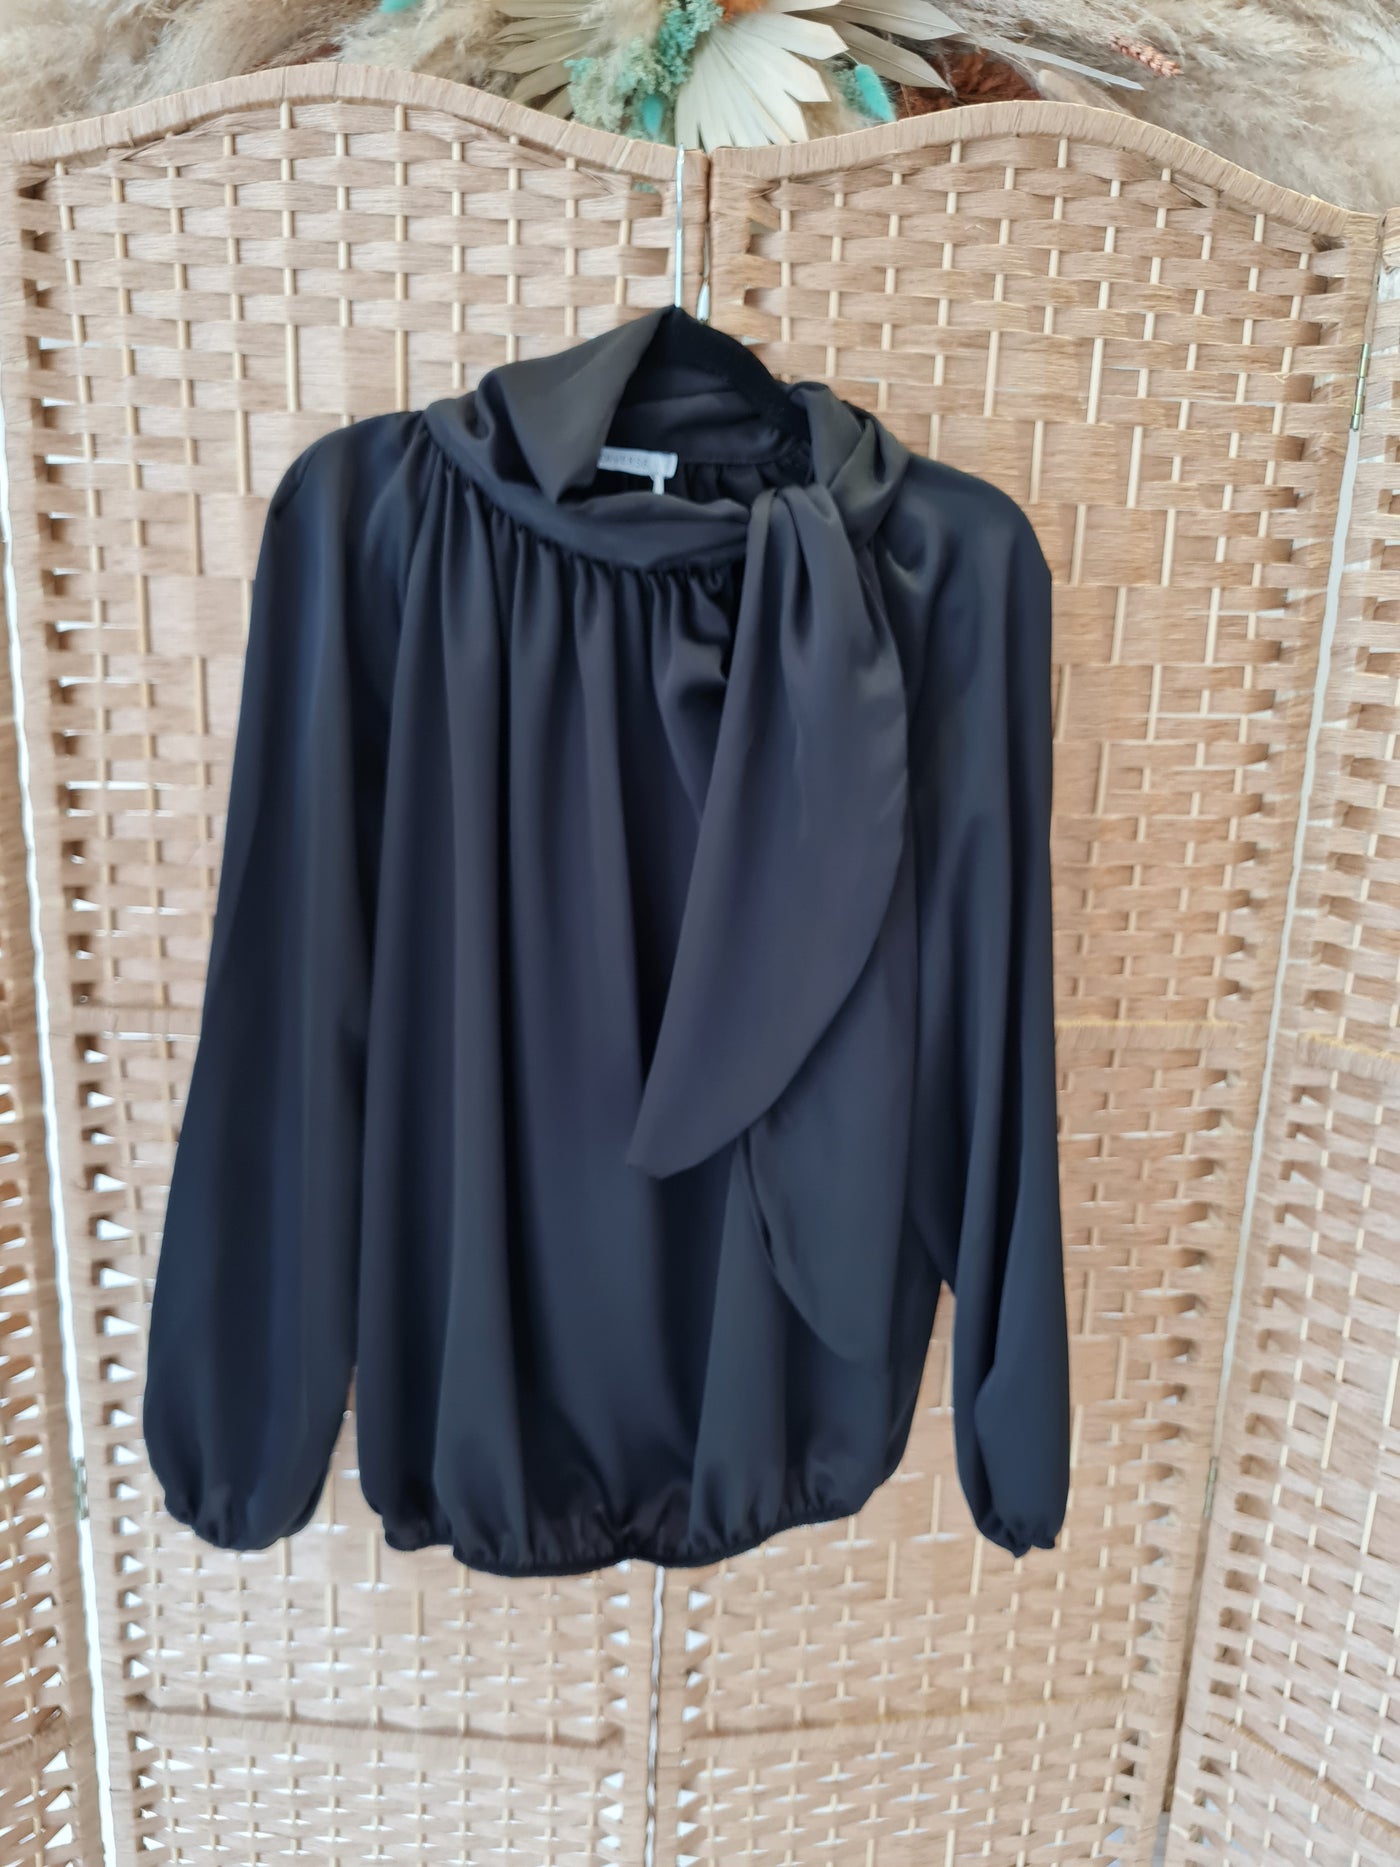 Satin pussy bow blouse in black one size